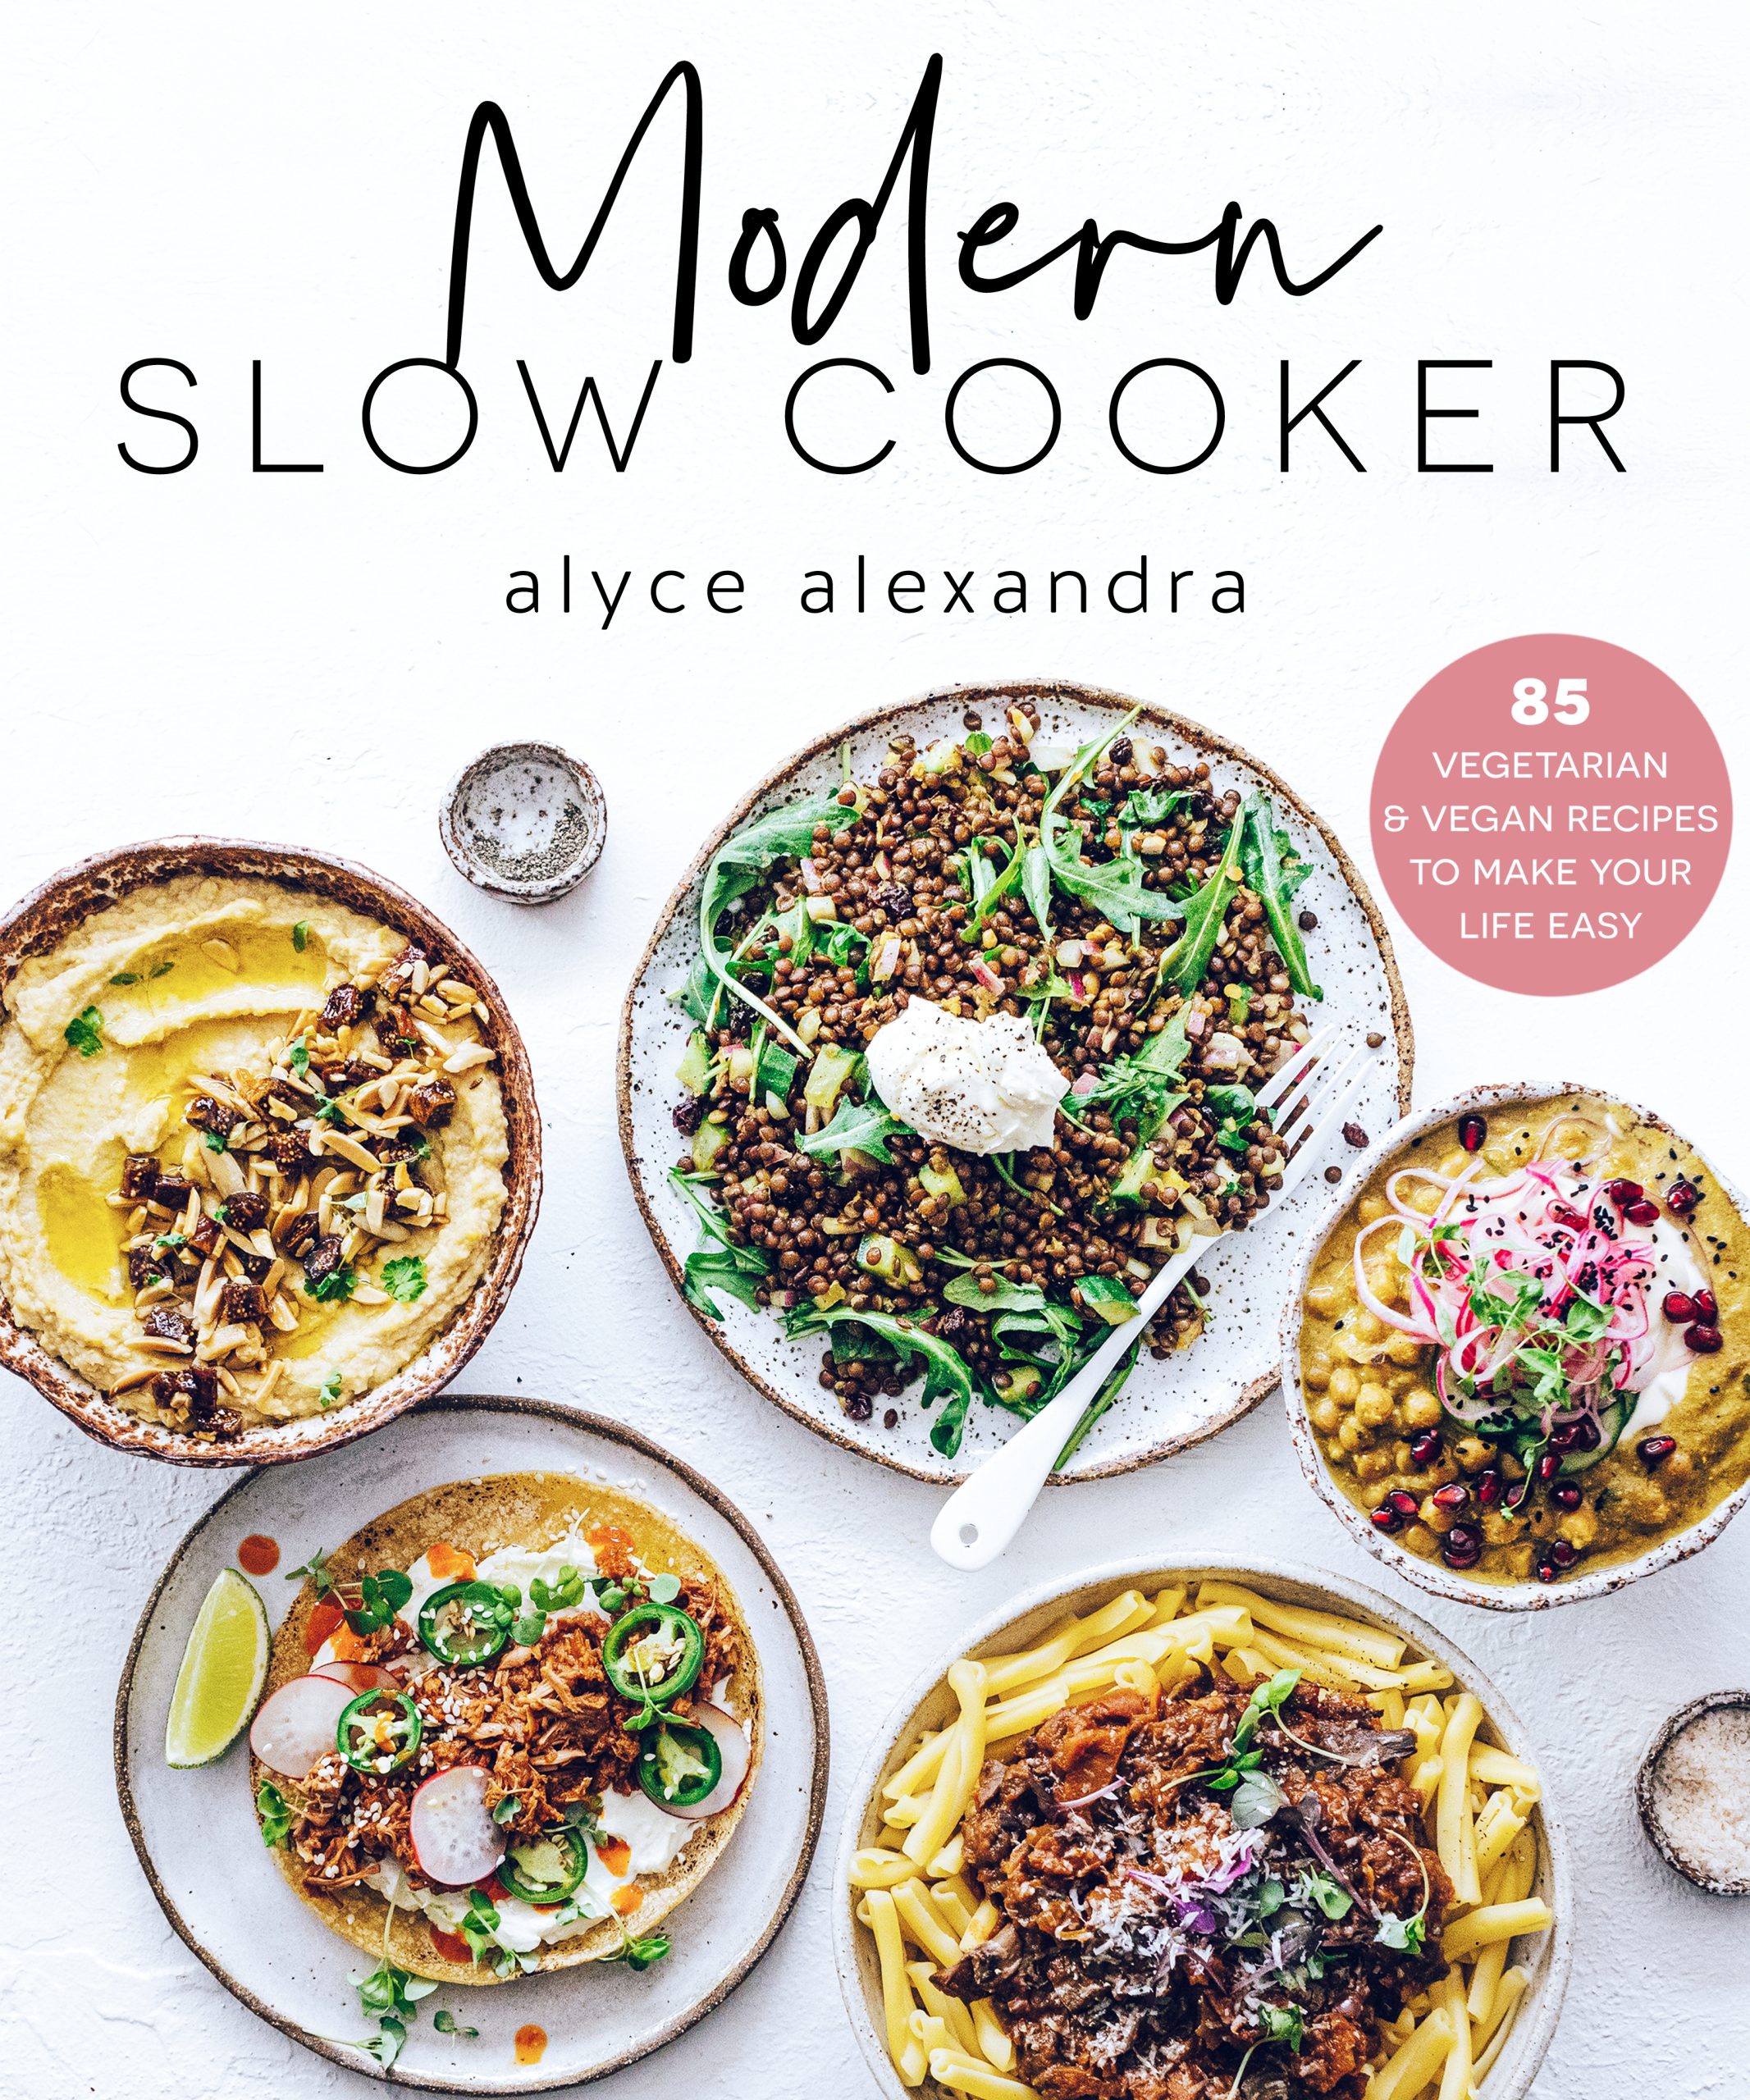 Modern Slow Cooker by 
Alyce Alexandra (Viking, RRP: $29.99) is available now.